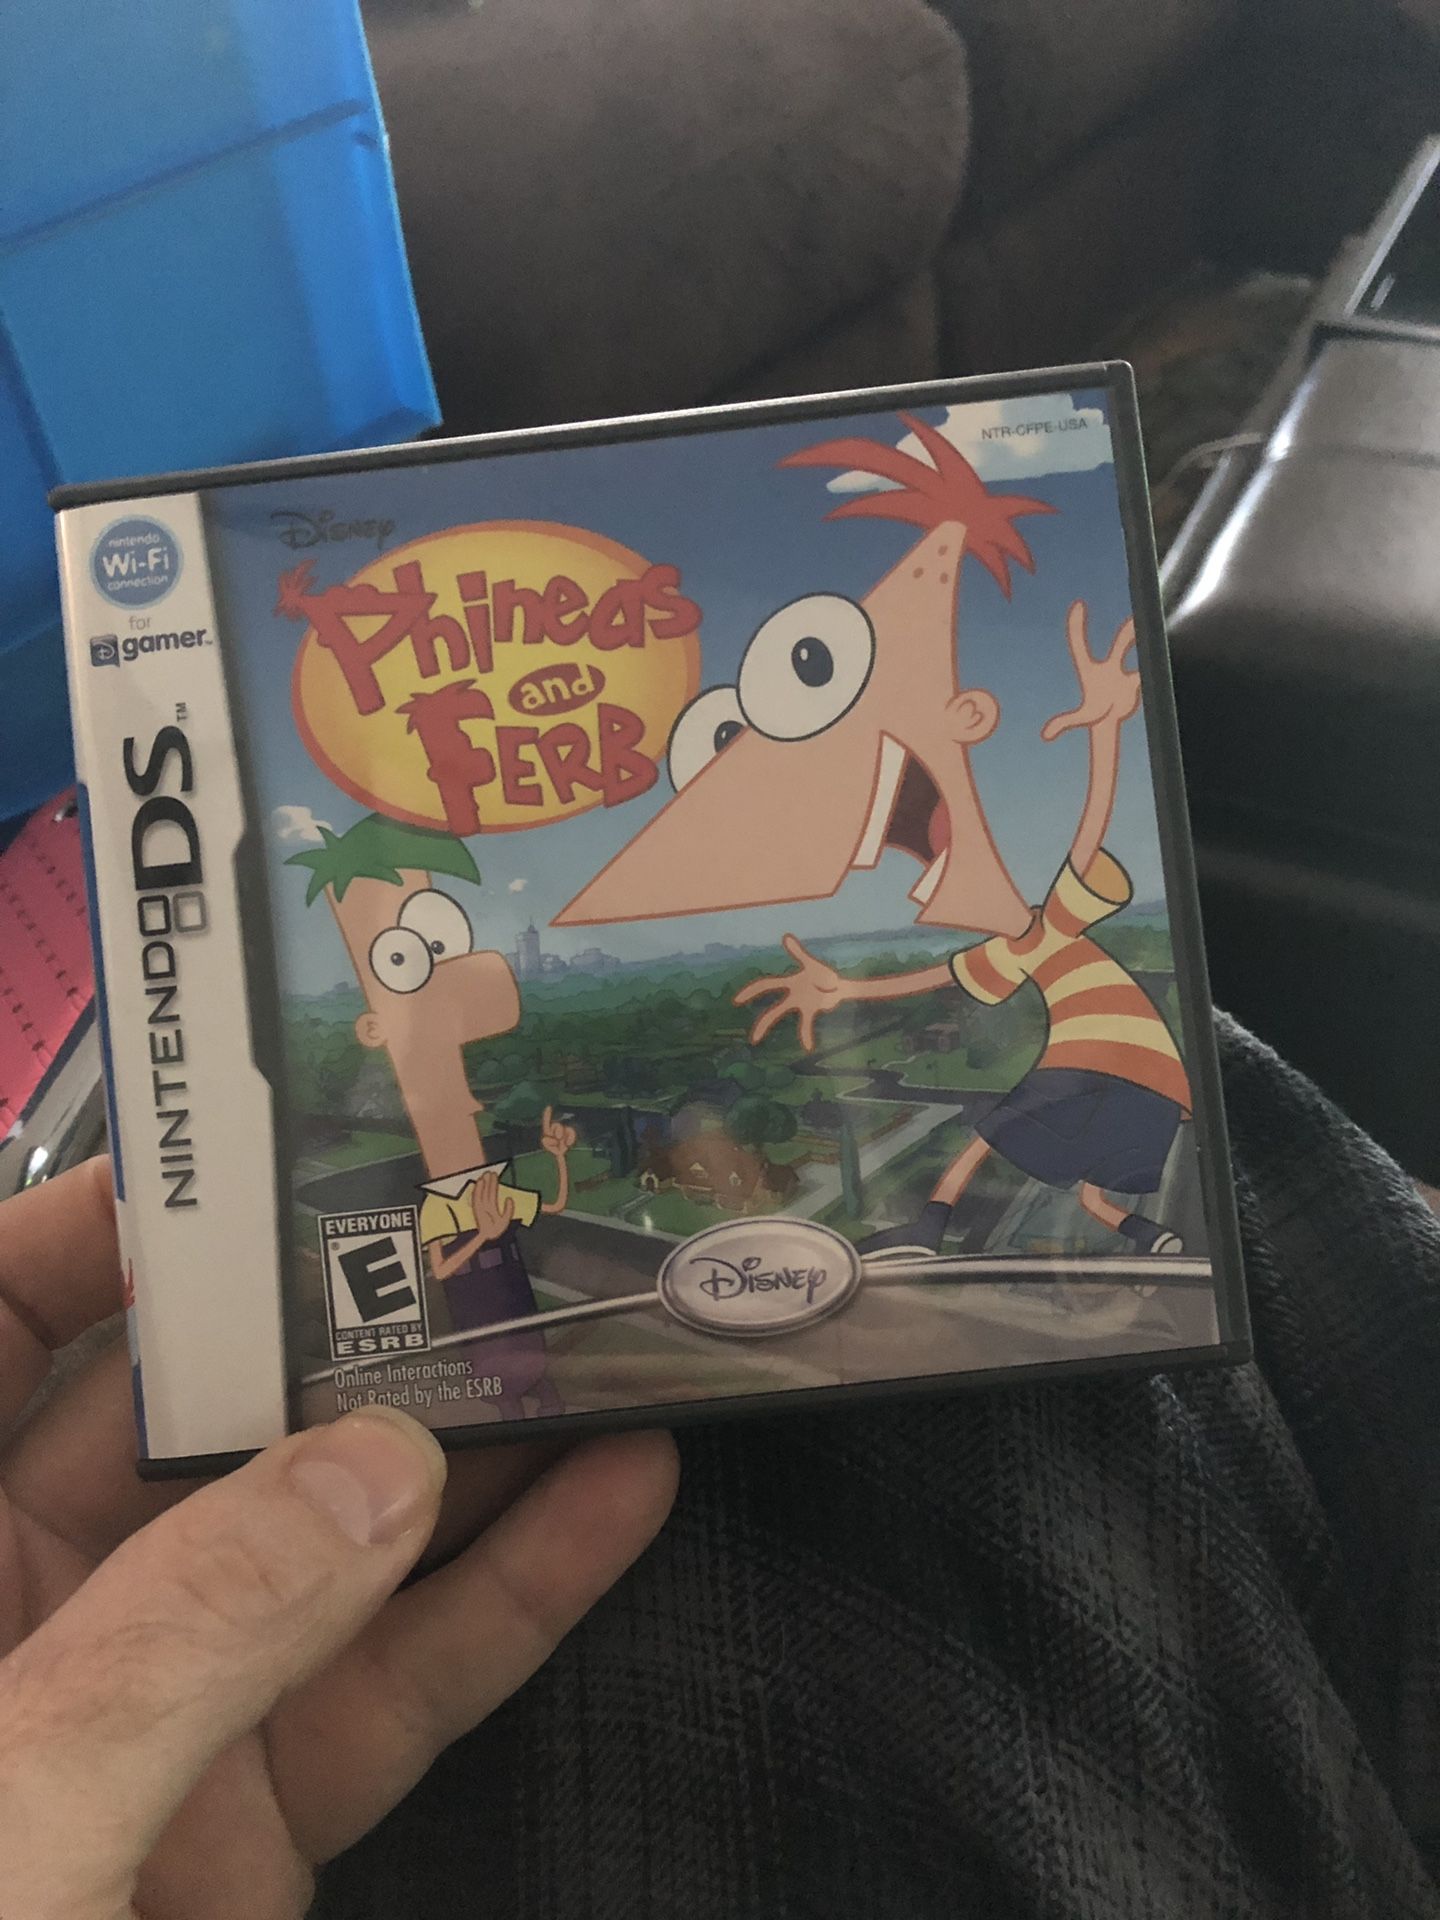 Nintendo DS Phineas and Ferb